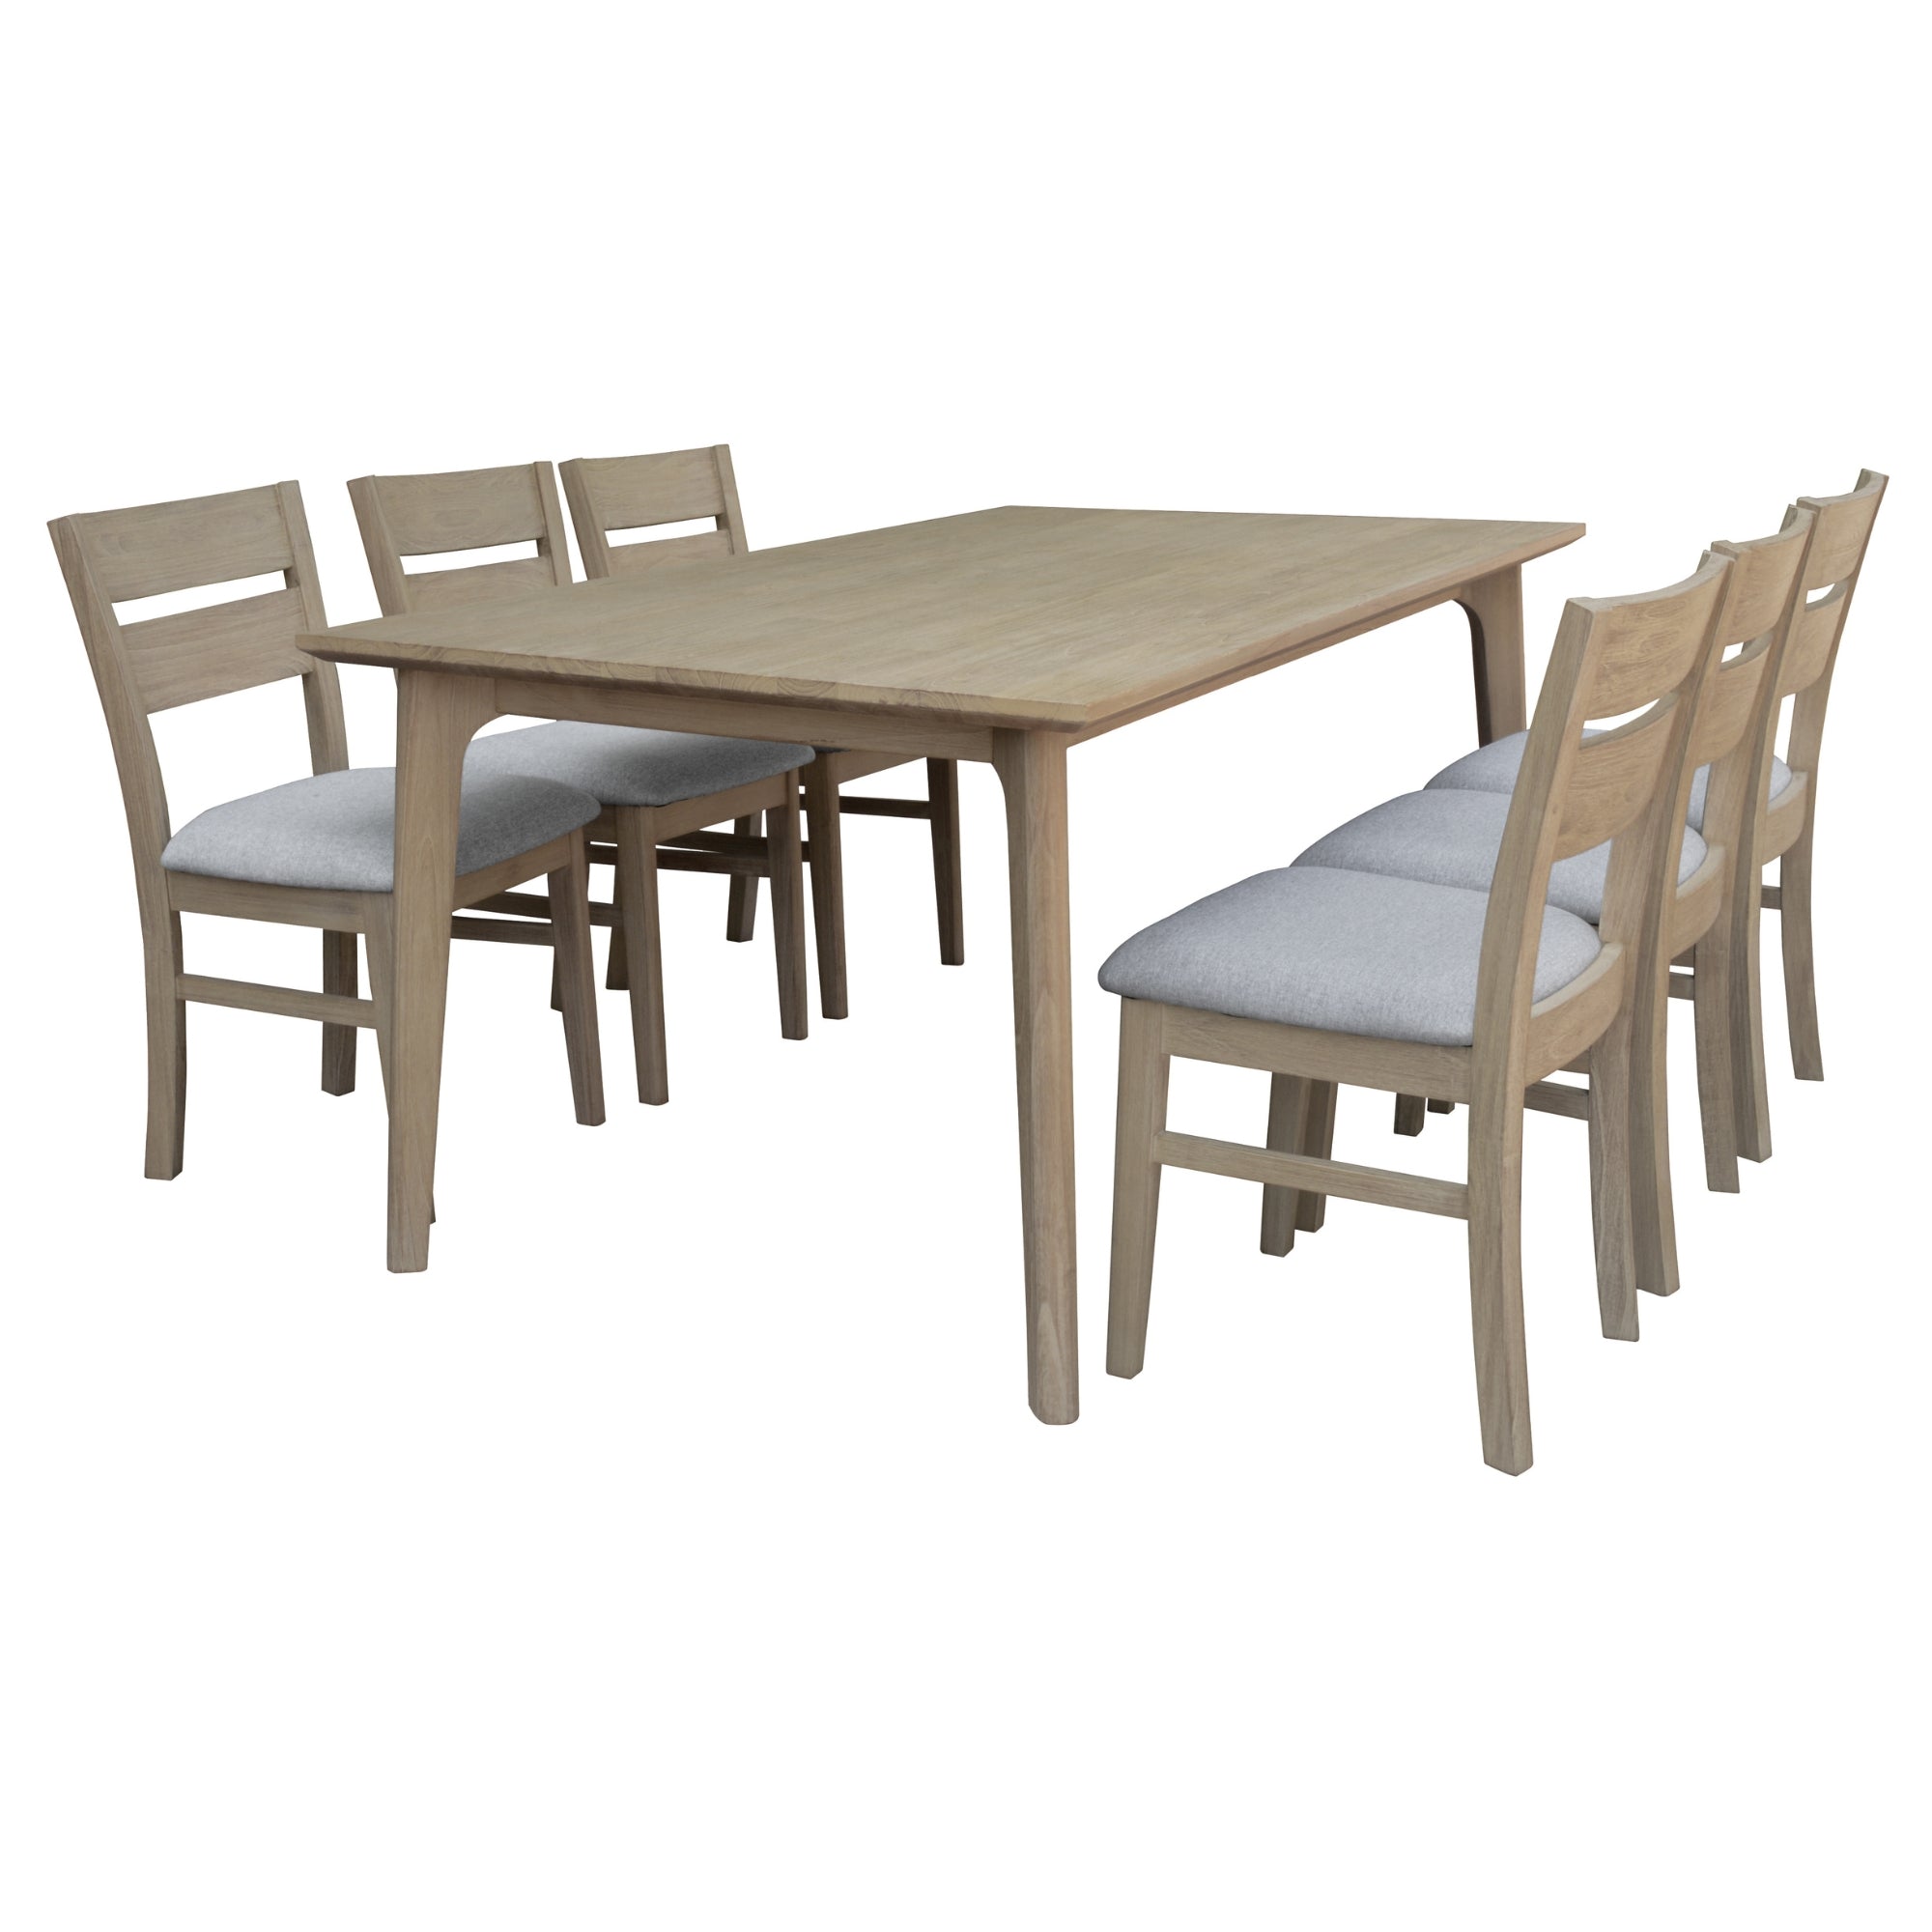 Solid Acacia 7pc Dining Table Set, Tapered Legs, Coastal Style - Tyler